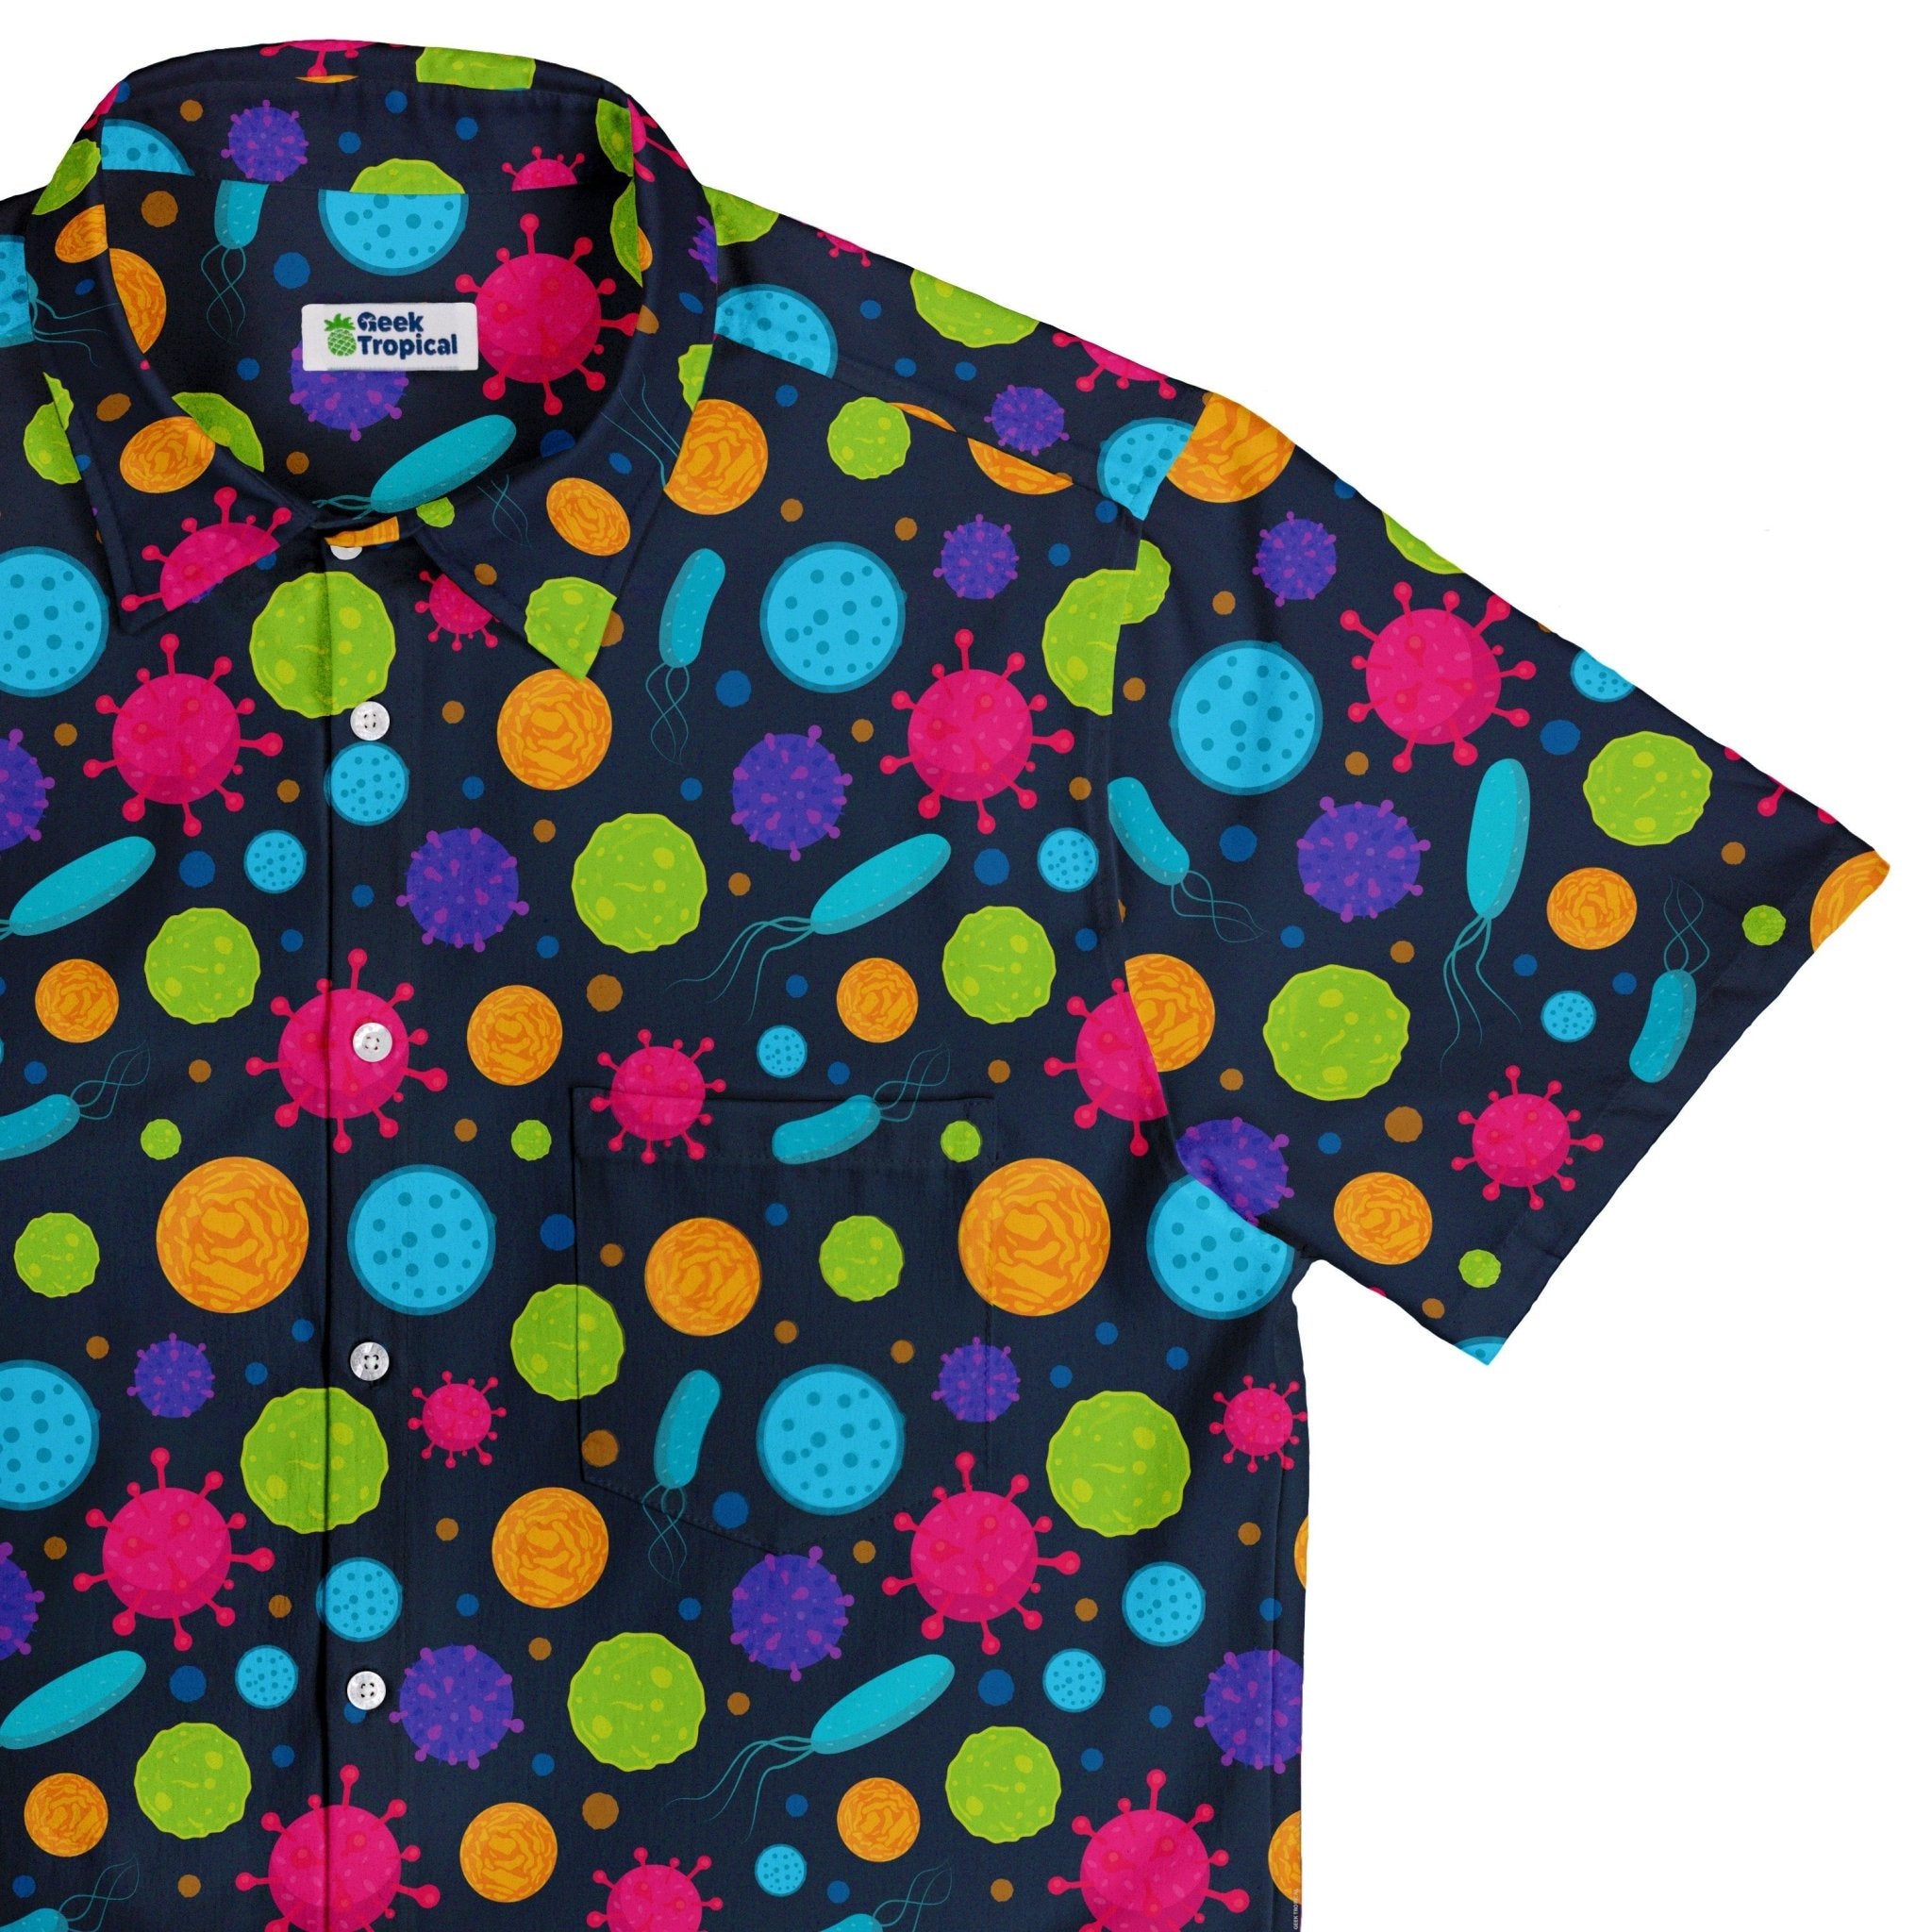 Science Microbiology Rainbow Navy Button Up Shirt - adult sizing - science print -